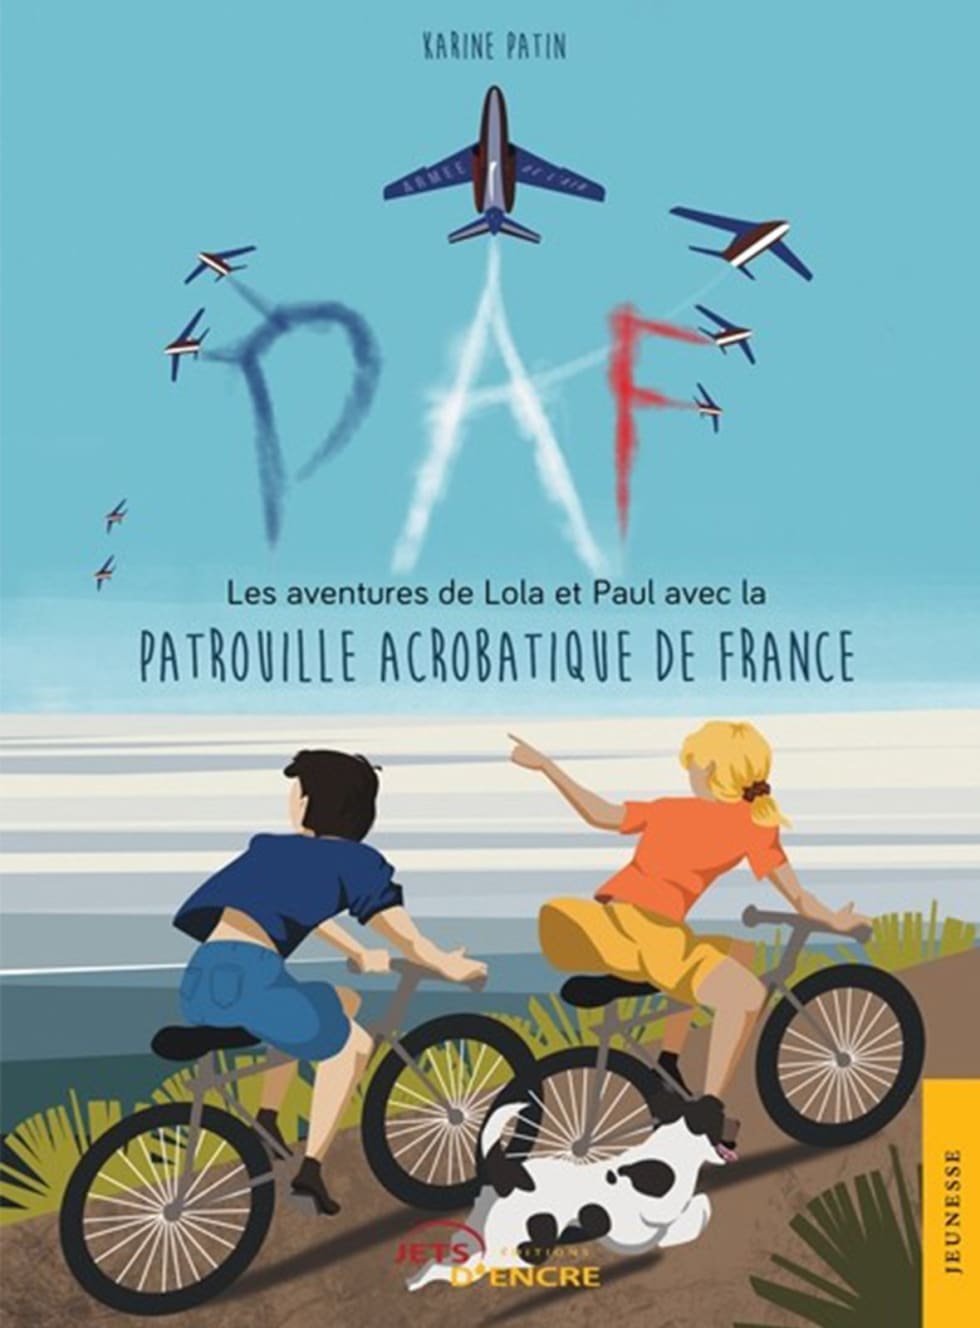 Cover of the Book “The Adventures of Lola and Paul with the Patrouille Acrobatique de France”